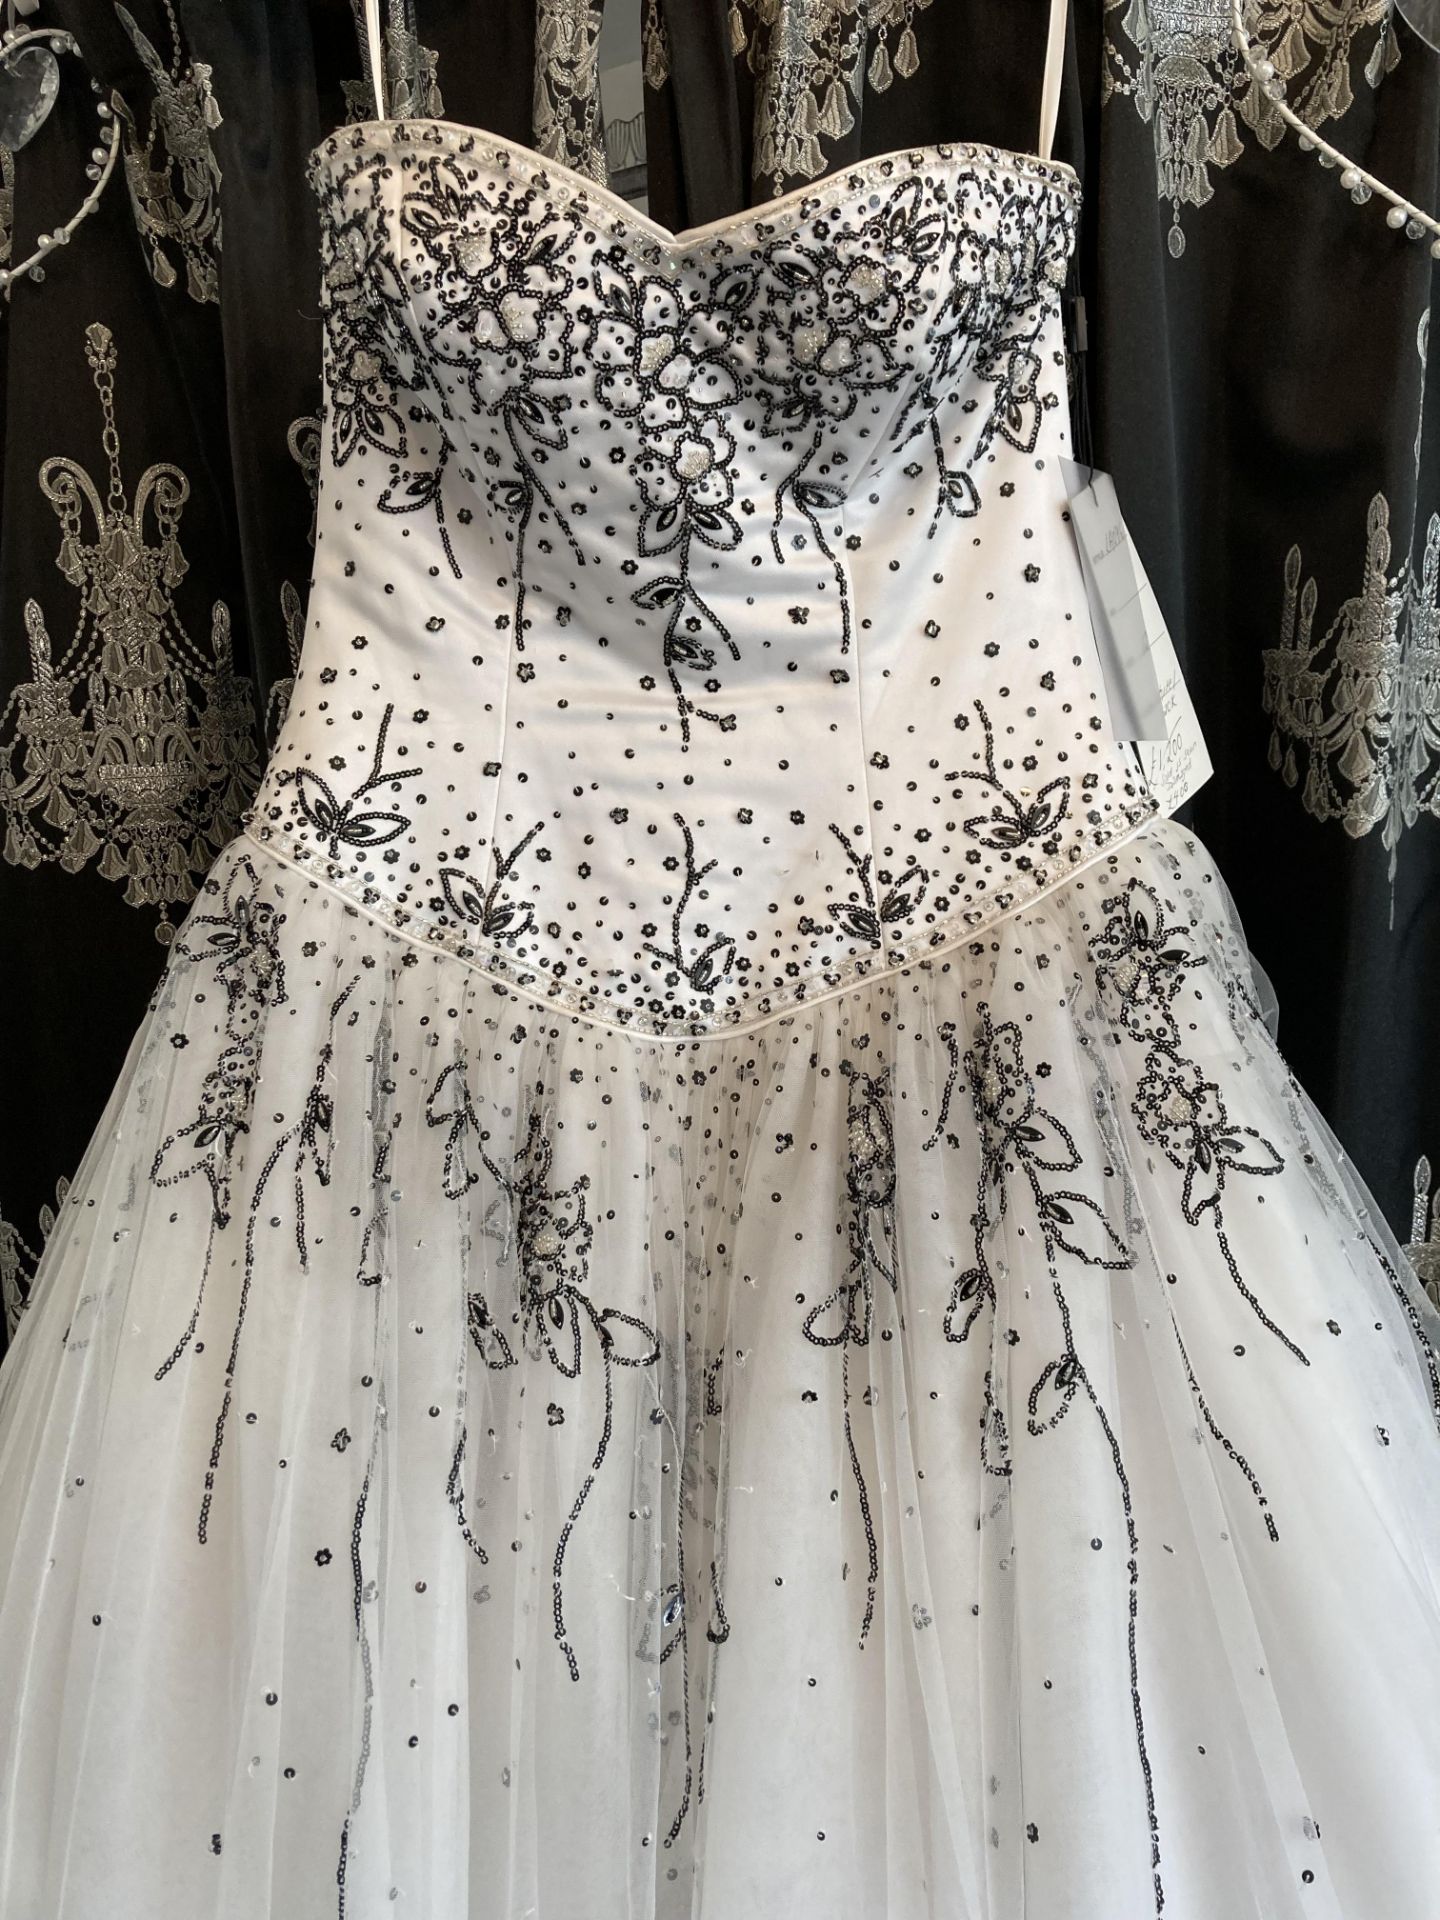 Princess ball gown (exhibition sample - damage on tulle overlay), black & white, size 10. - Image 2 of 4